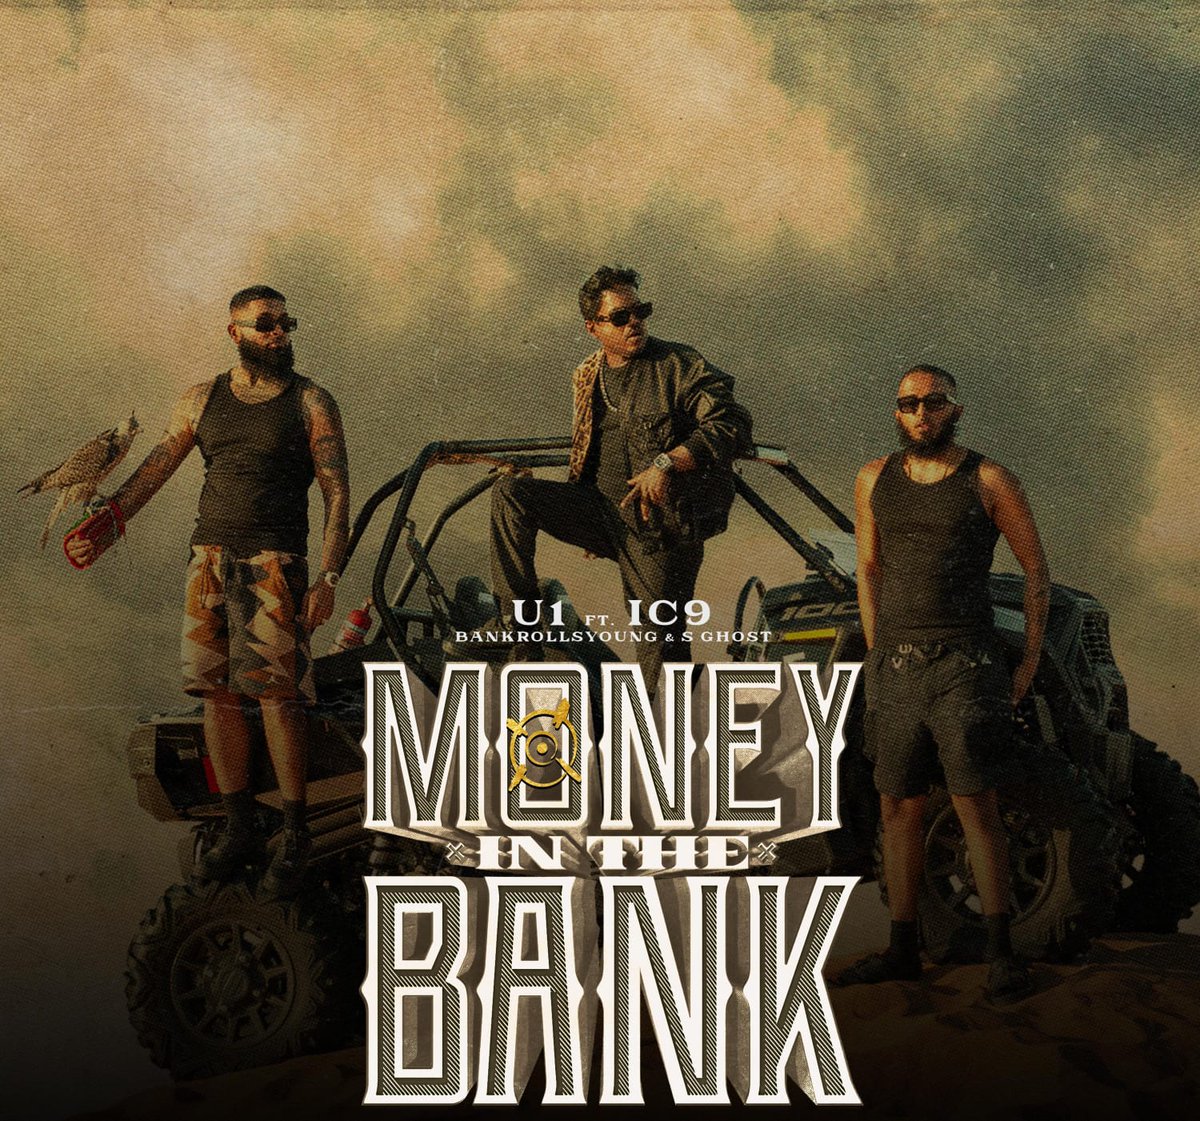 Happy to share my next Indie track #MoneyInTheBank 💵💰 ft. #IC9 😊 Had a great time collaborating with #IC9, Bank Rolls Young & S Ghost for this one! @U1Records youtu.be/41W7sRc5wps